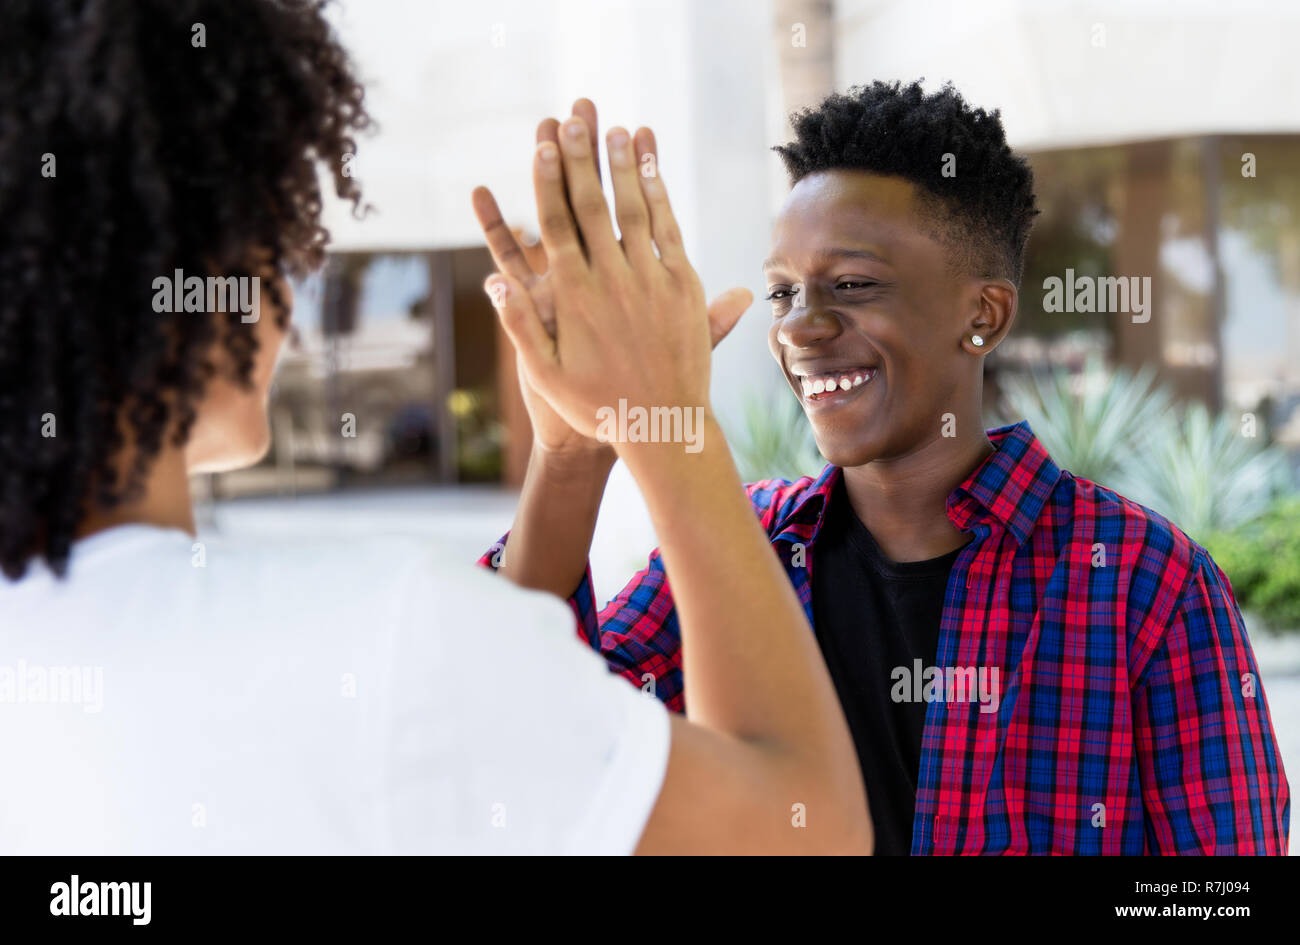 African american man gives high five to friend outdoor in the city Stock Photo